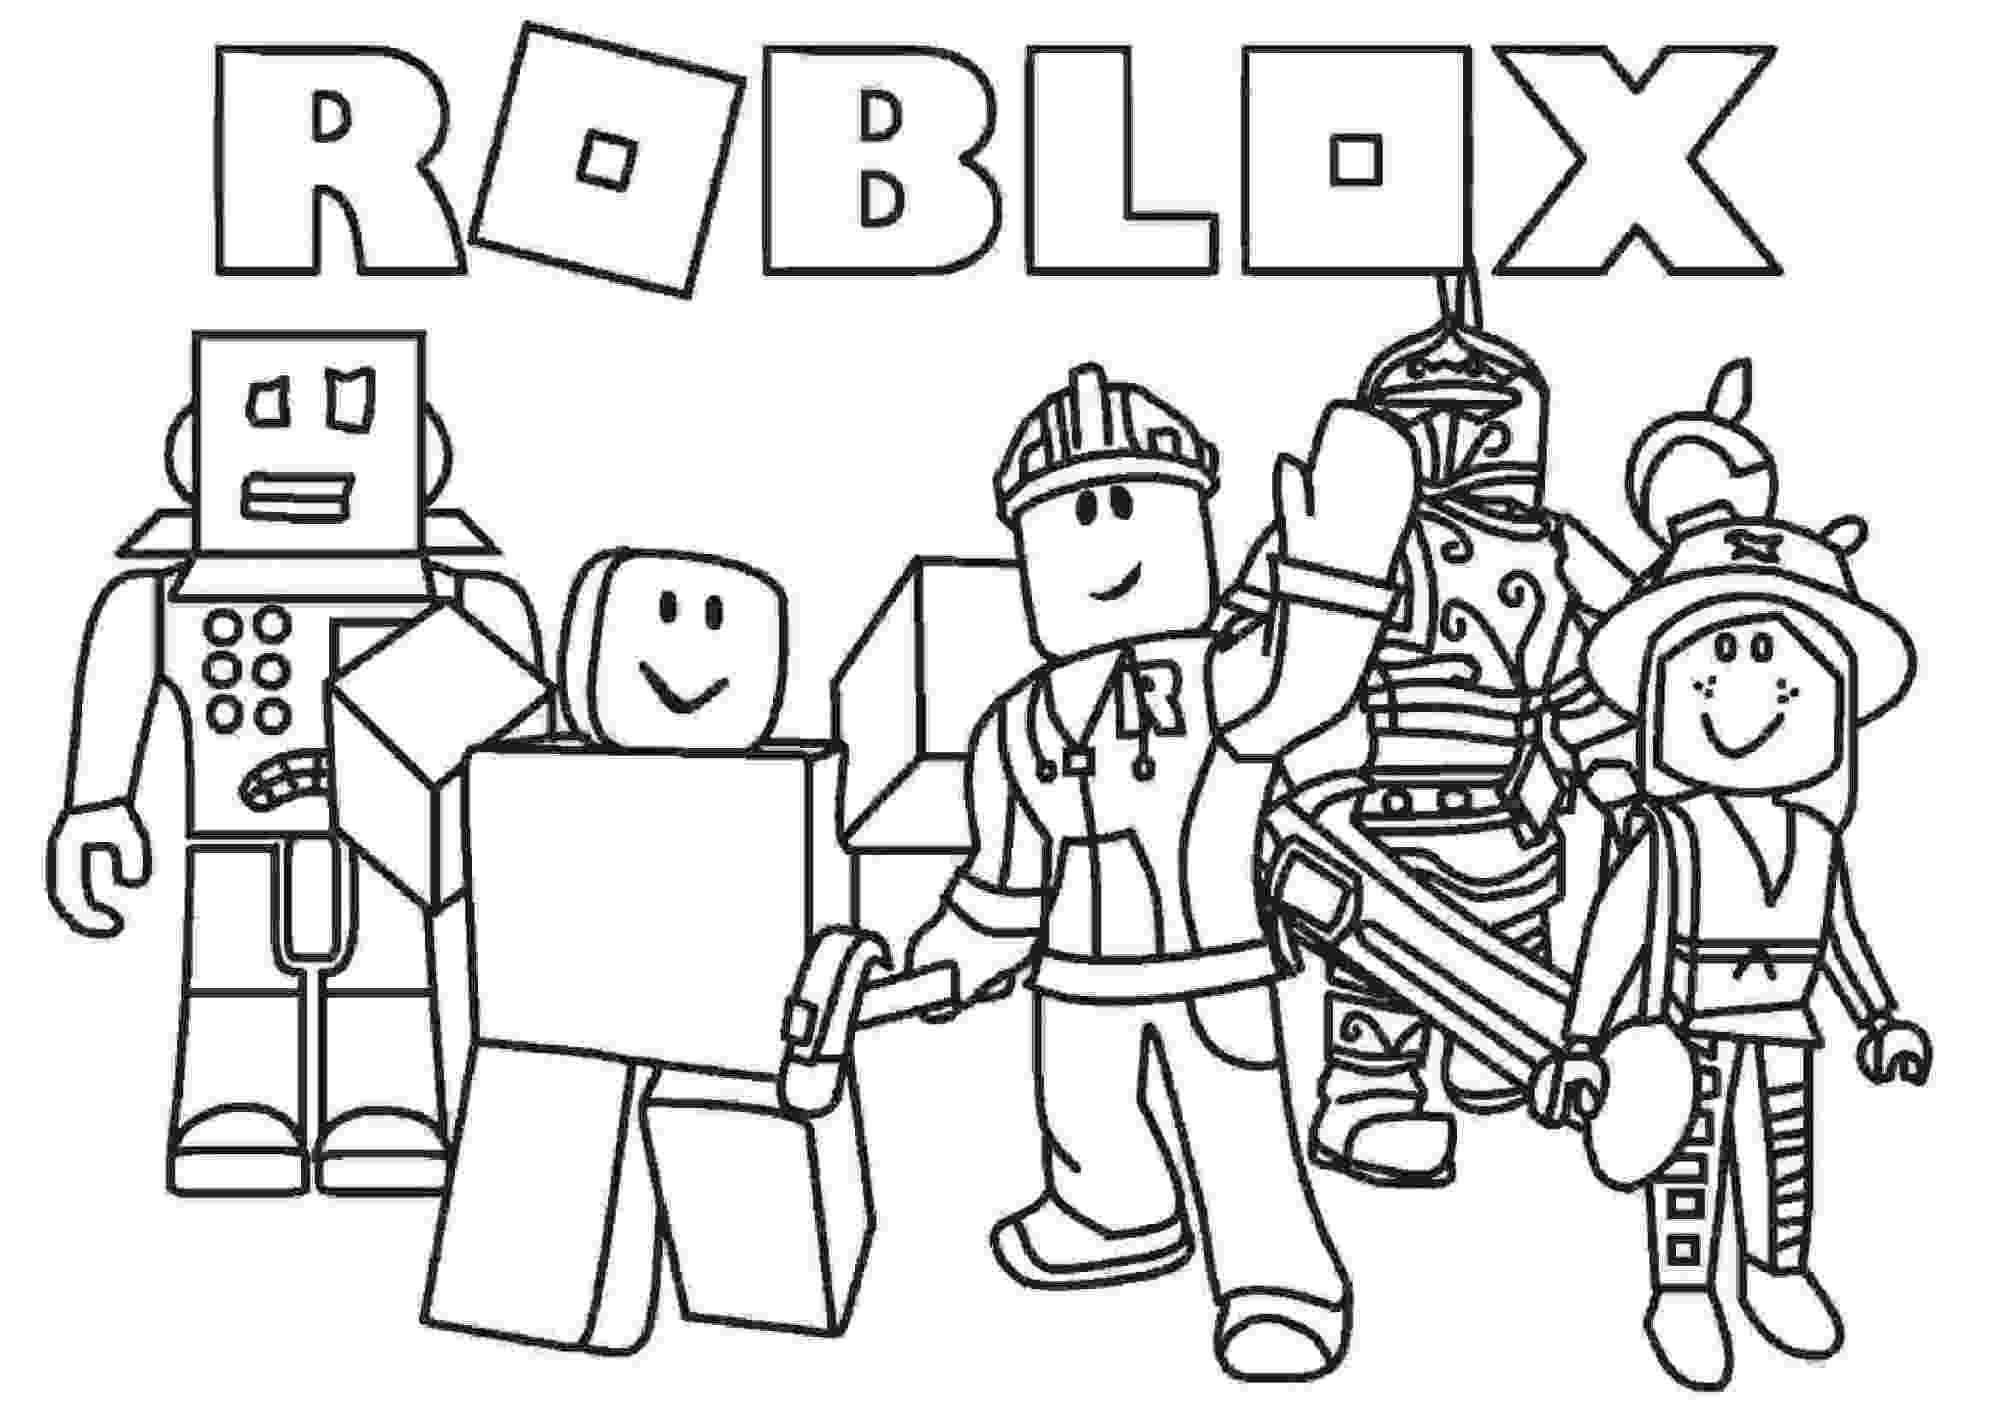 Roblox team protects the earth Coloring Pages